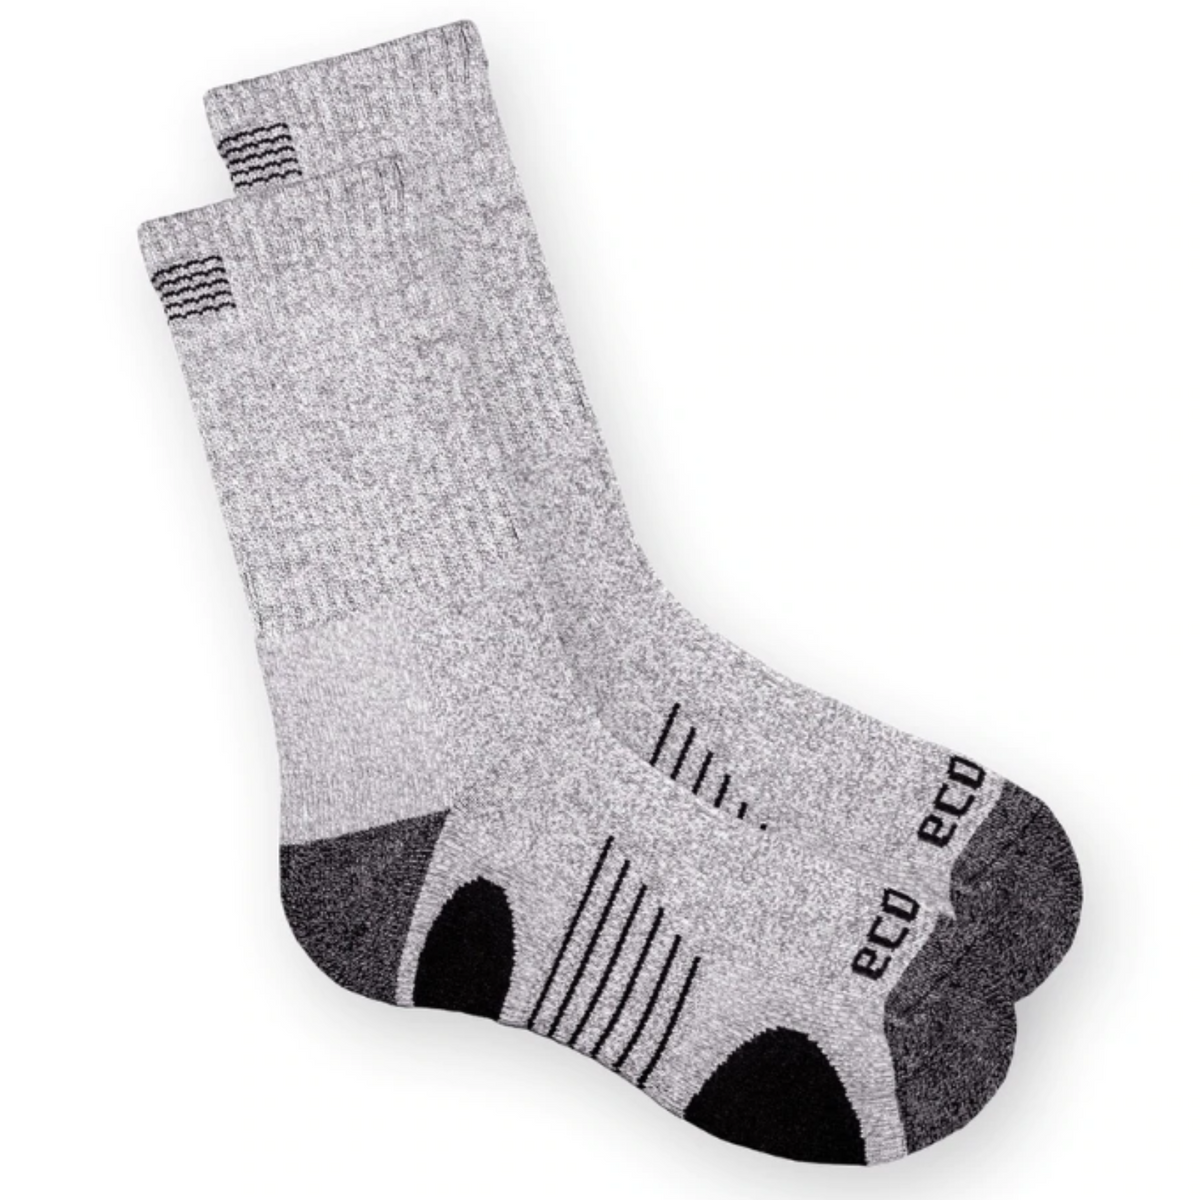 EcoSox Bamboo Hiking Full Cushion Crew height women&#39;s and men&#39;s socks in gray and black